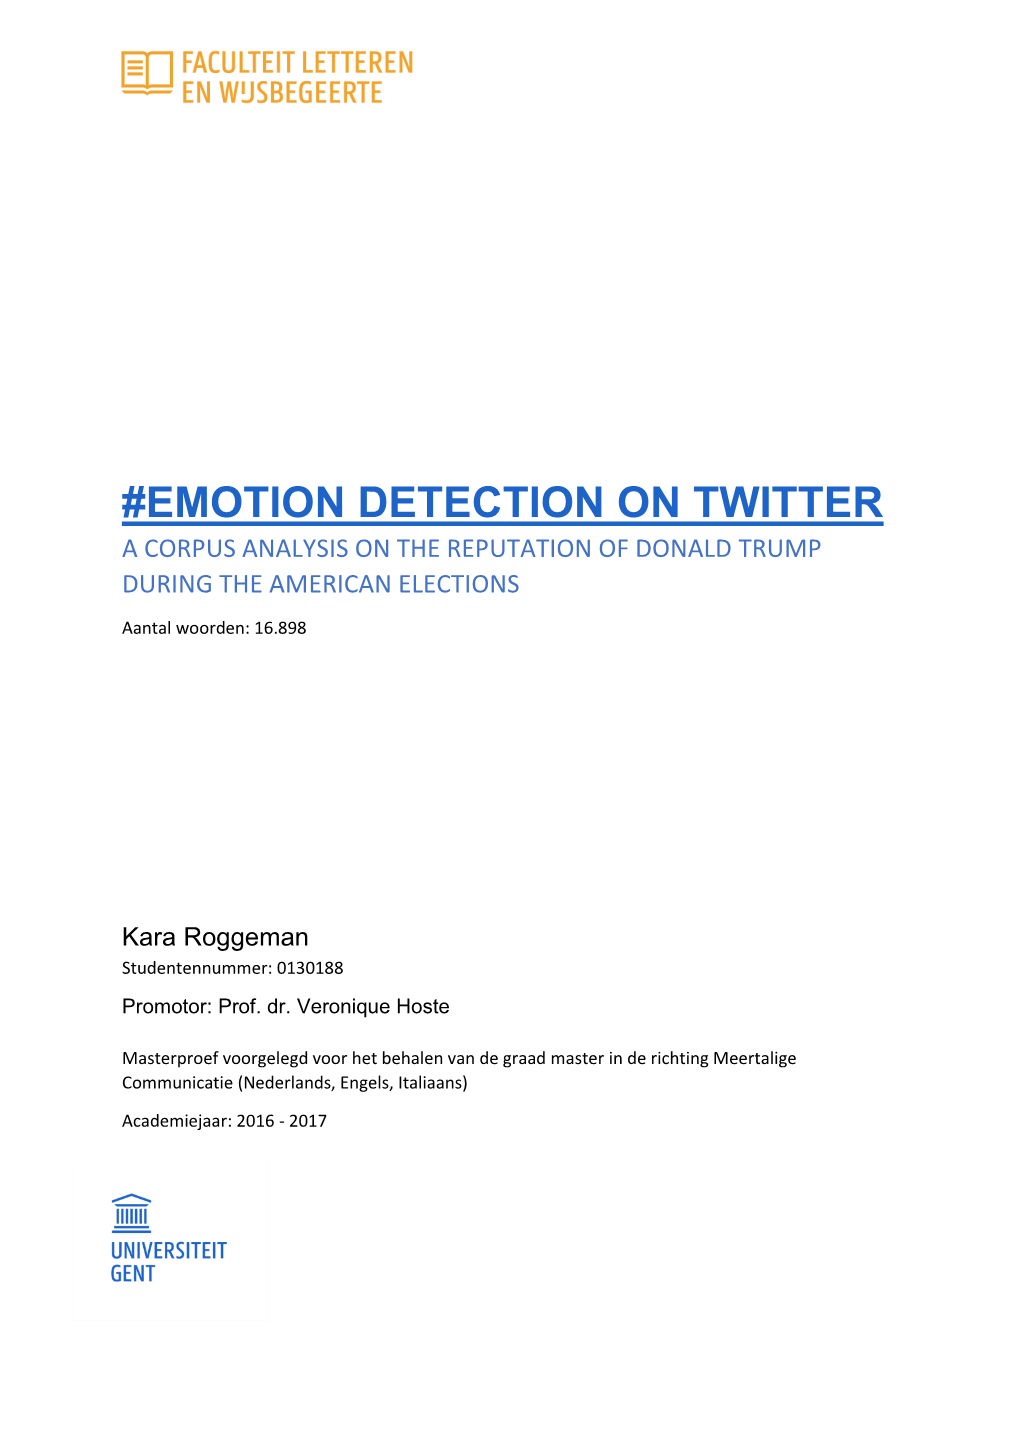 Emotion Detection on Twitter a Corpus Analysis on the Reputation of Donald Trump During the American Elections